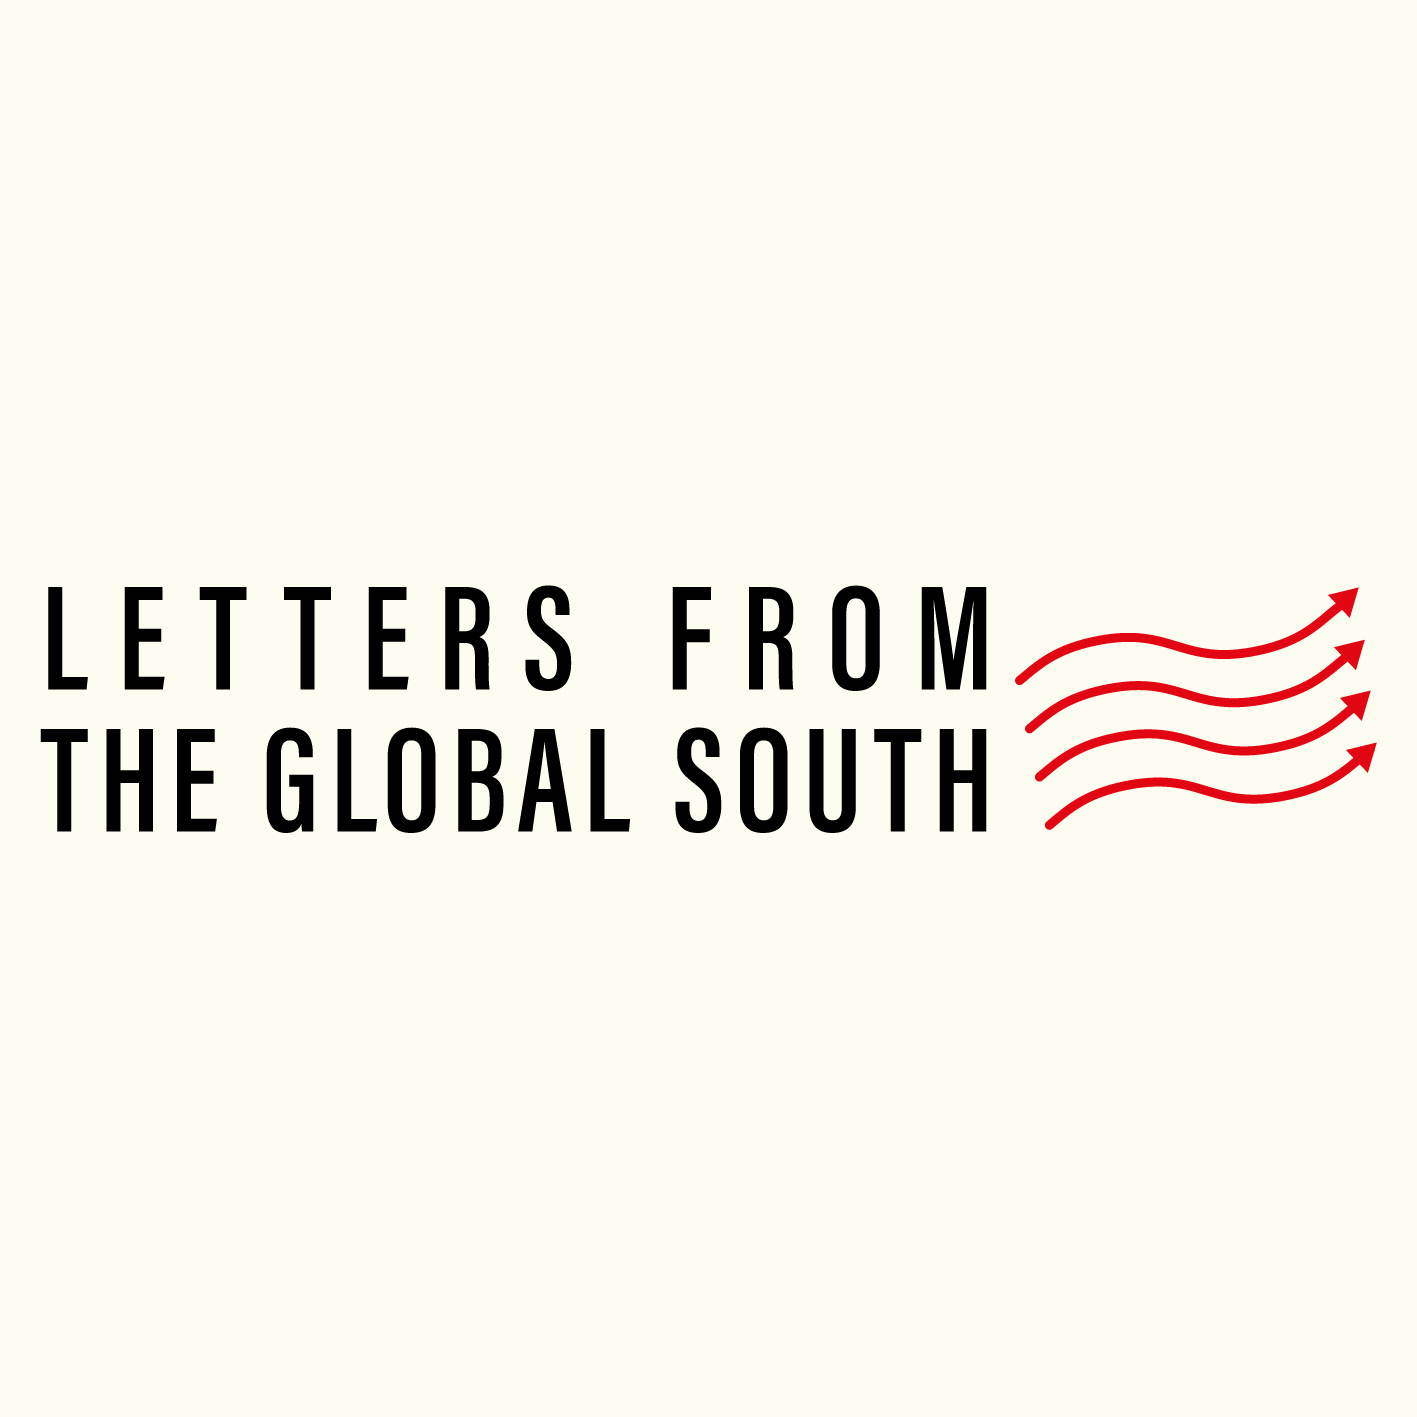 Letters-From-The-Global-South-Logo-by-Greg-Bunbury